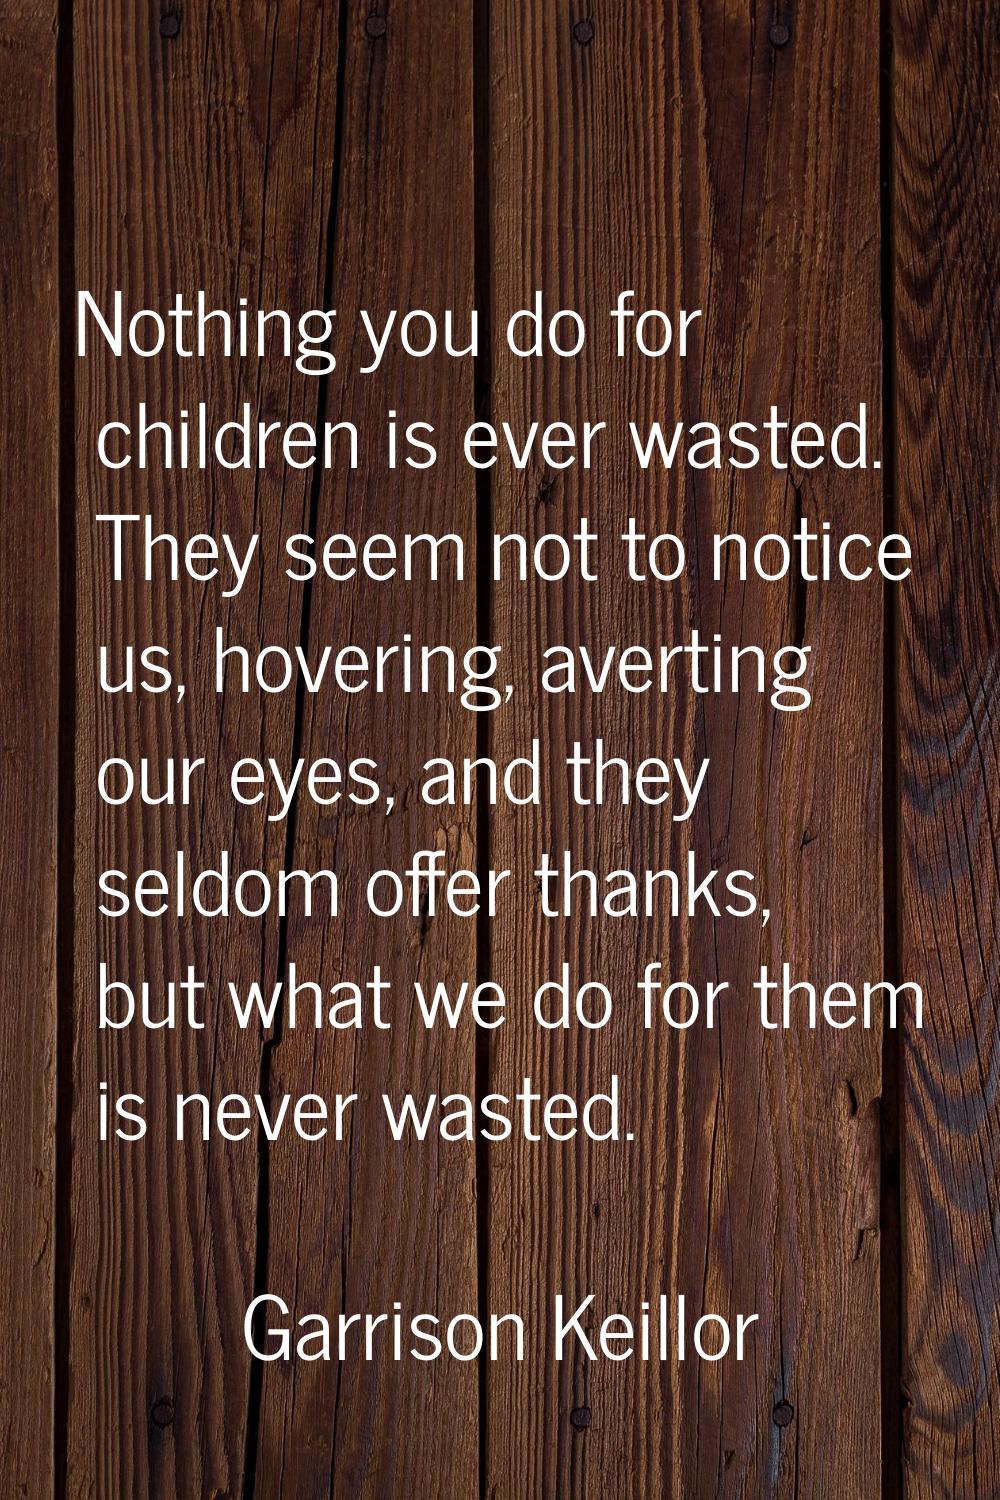 Nothing you do for children is ever wasted. They seem not to notice us, hovering, averting our eyes